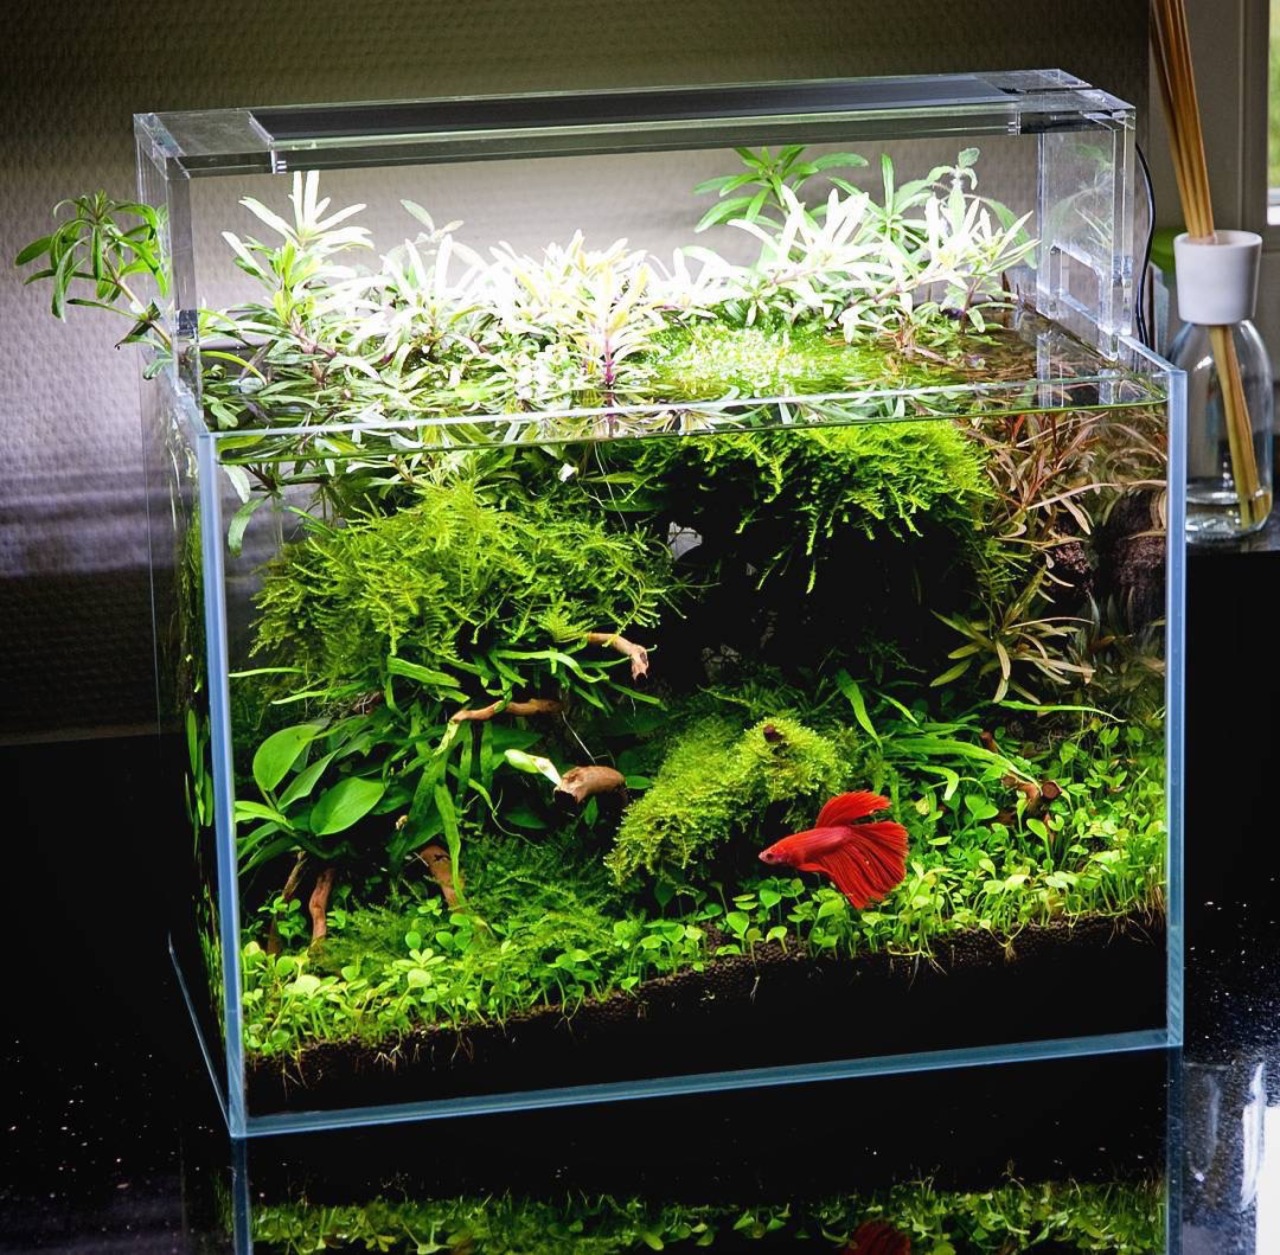 AQ*44 — Beautiful planted tank for a Betta with simple 